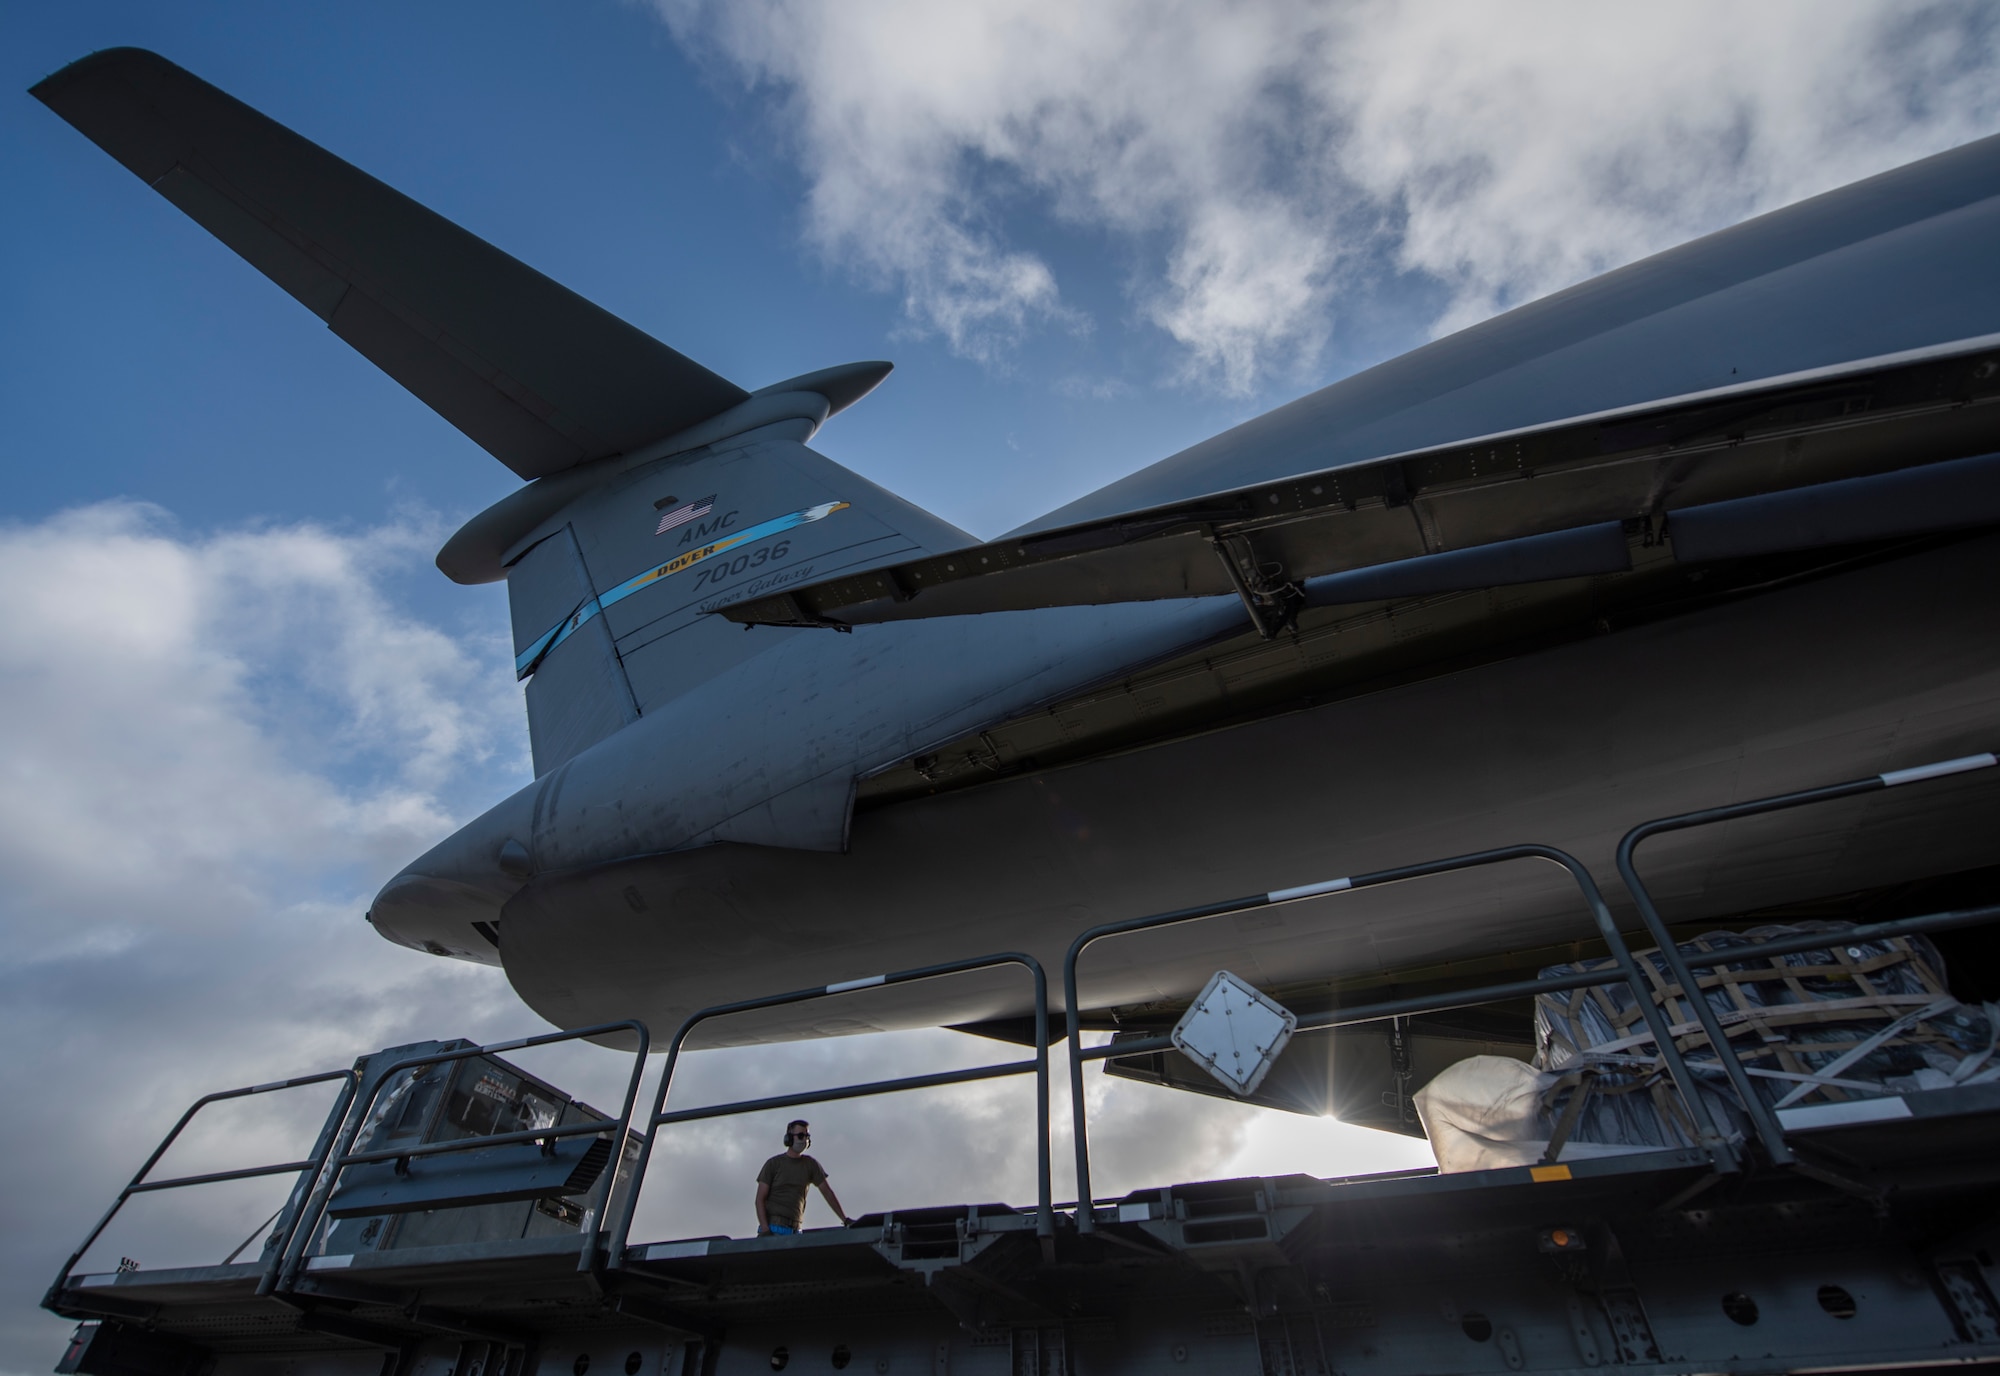 An Airman from the 36th Logistics Readiness Squadron unloads cargo from a C-5M Super Galaxy at Andersen Air Force Base, Guam, April 29, 2020. The C-5 delivered cargo for the 9th Expeditionary Bomb Squadron Bomber Task Force deployment. The BTF is deployed to Andersen AFB to support Pacific Air Forces’ training efforts with allies, partners and joint forces; and strategic deterrence missions to reinforce the rules-based order in the Indo-Pacific region. (U.S. Air Force photo by Senior Airman River Bruce)